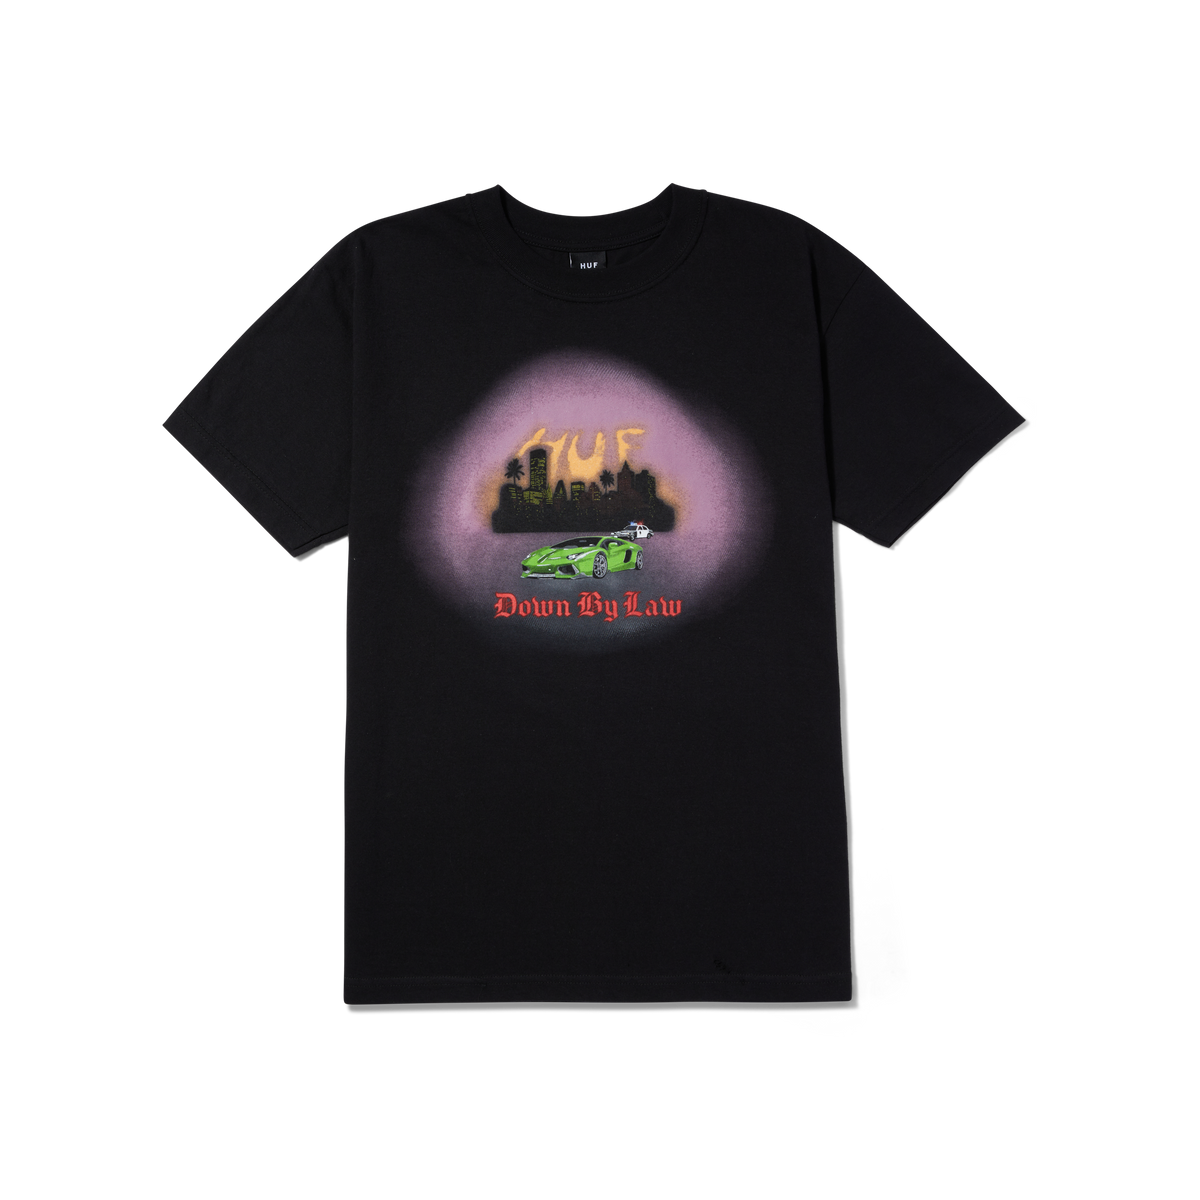 HUF Down By Law S/S Tee - Black